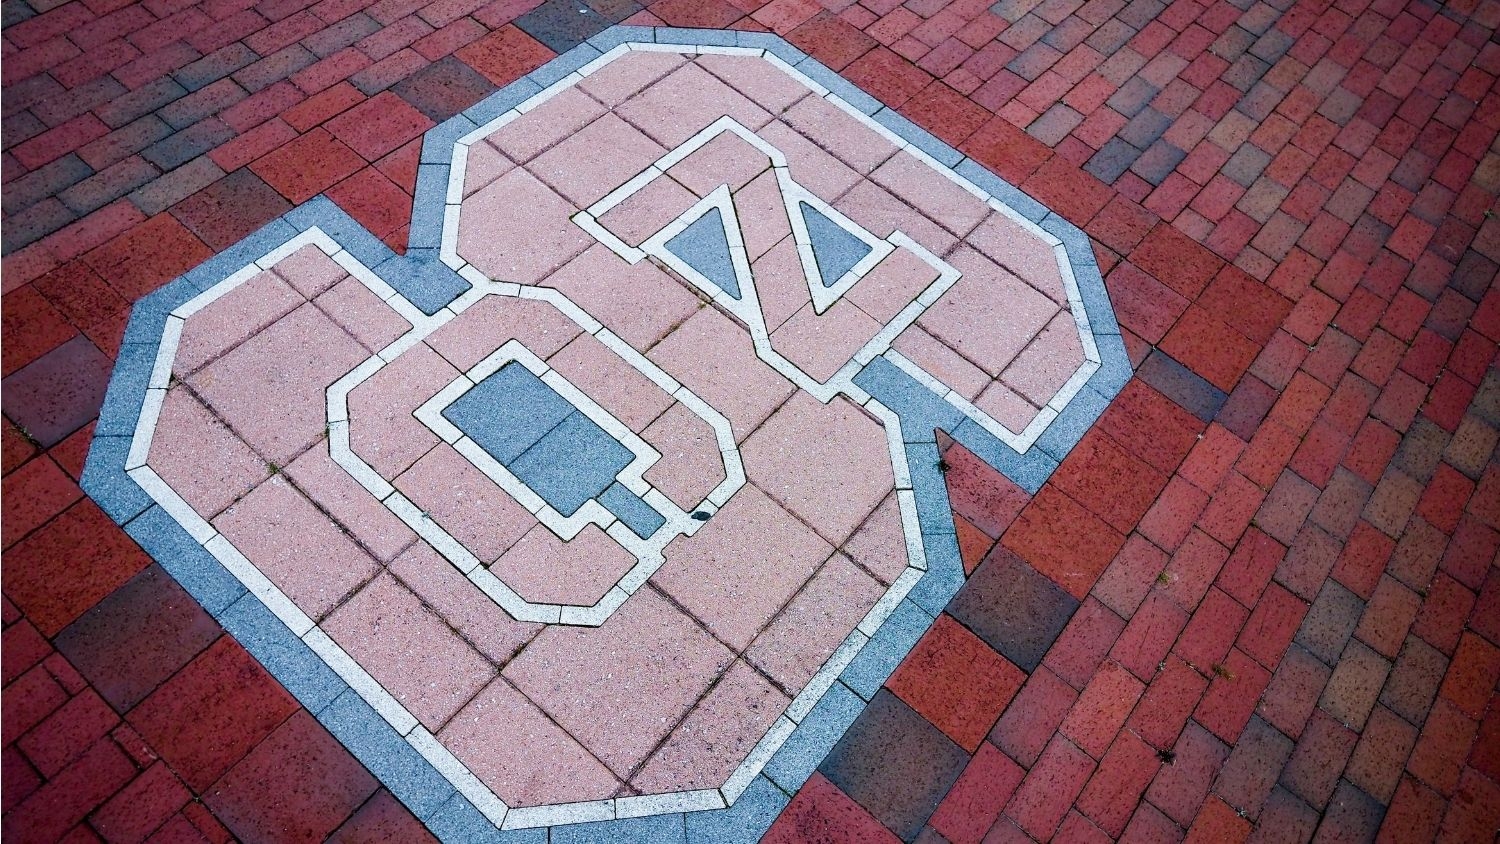 NC State logo in the bricks off Varsity Drive - Sonja Stills to Lead Diversity Seminar at NC State - College of Natural Resources at NC State University